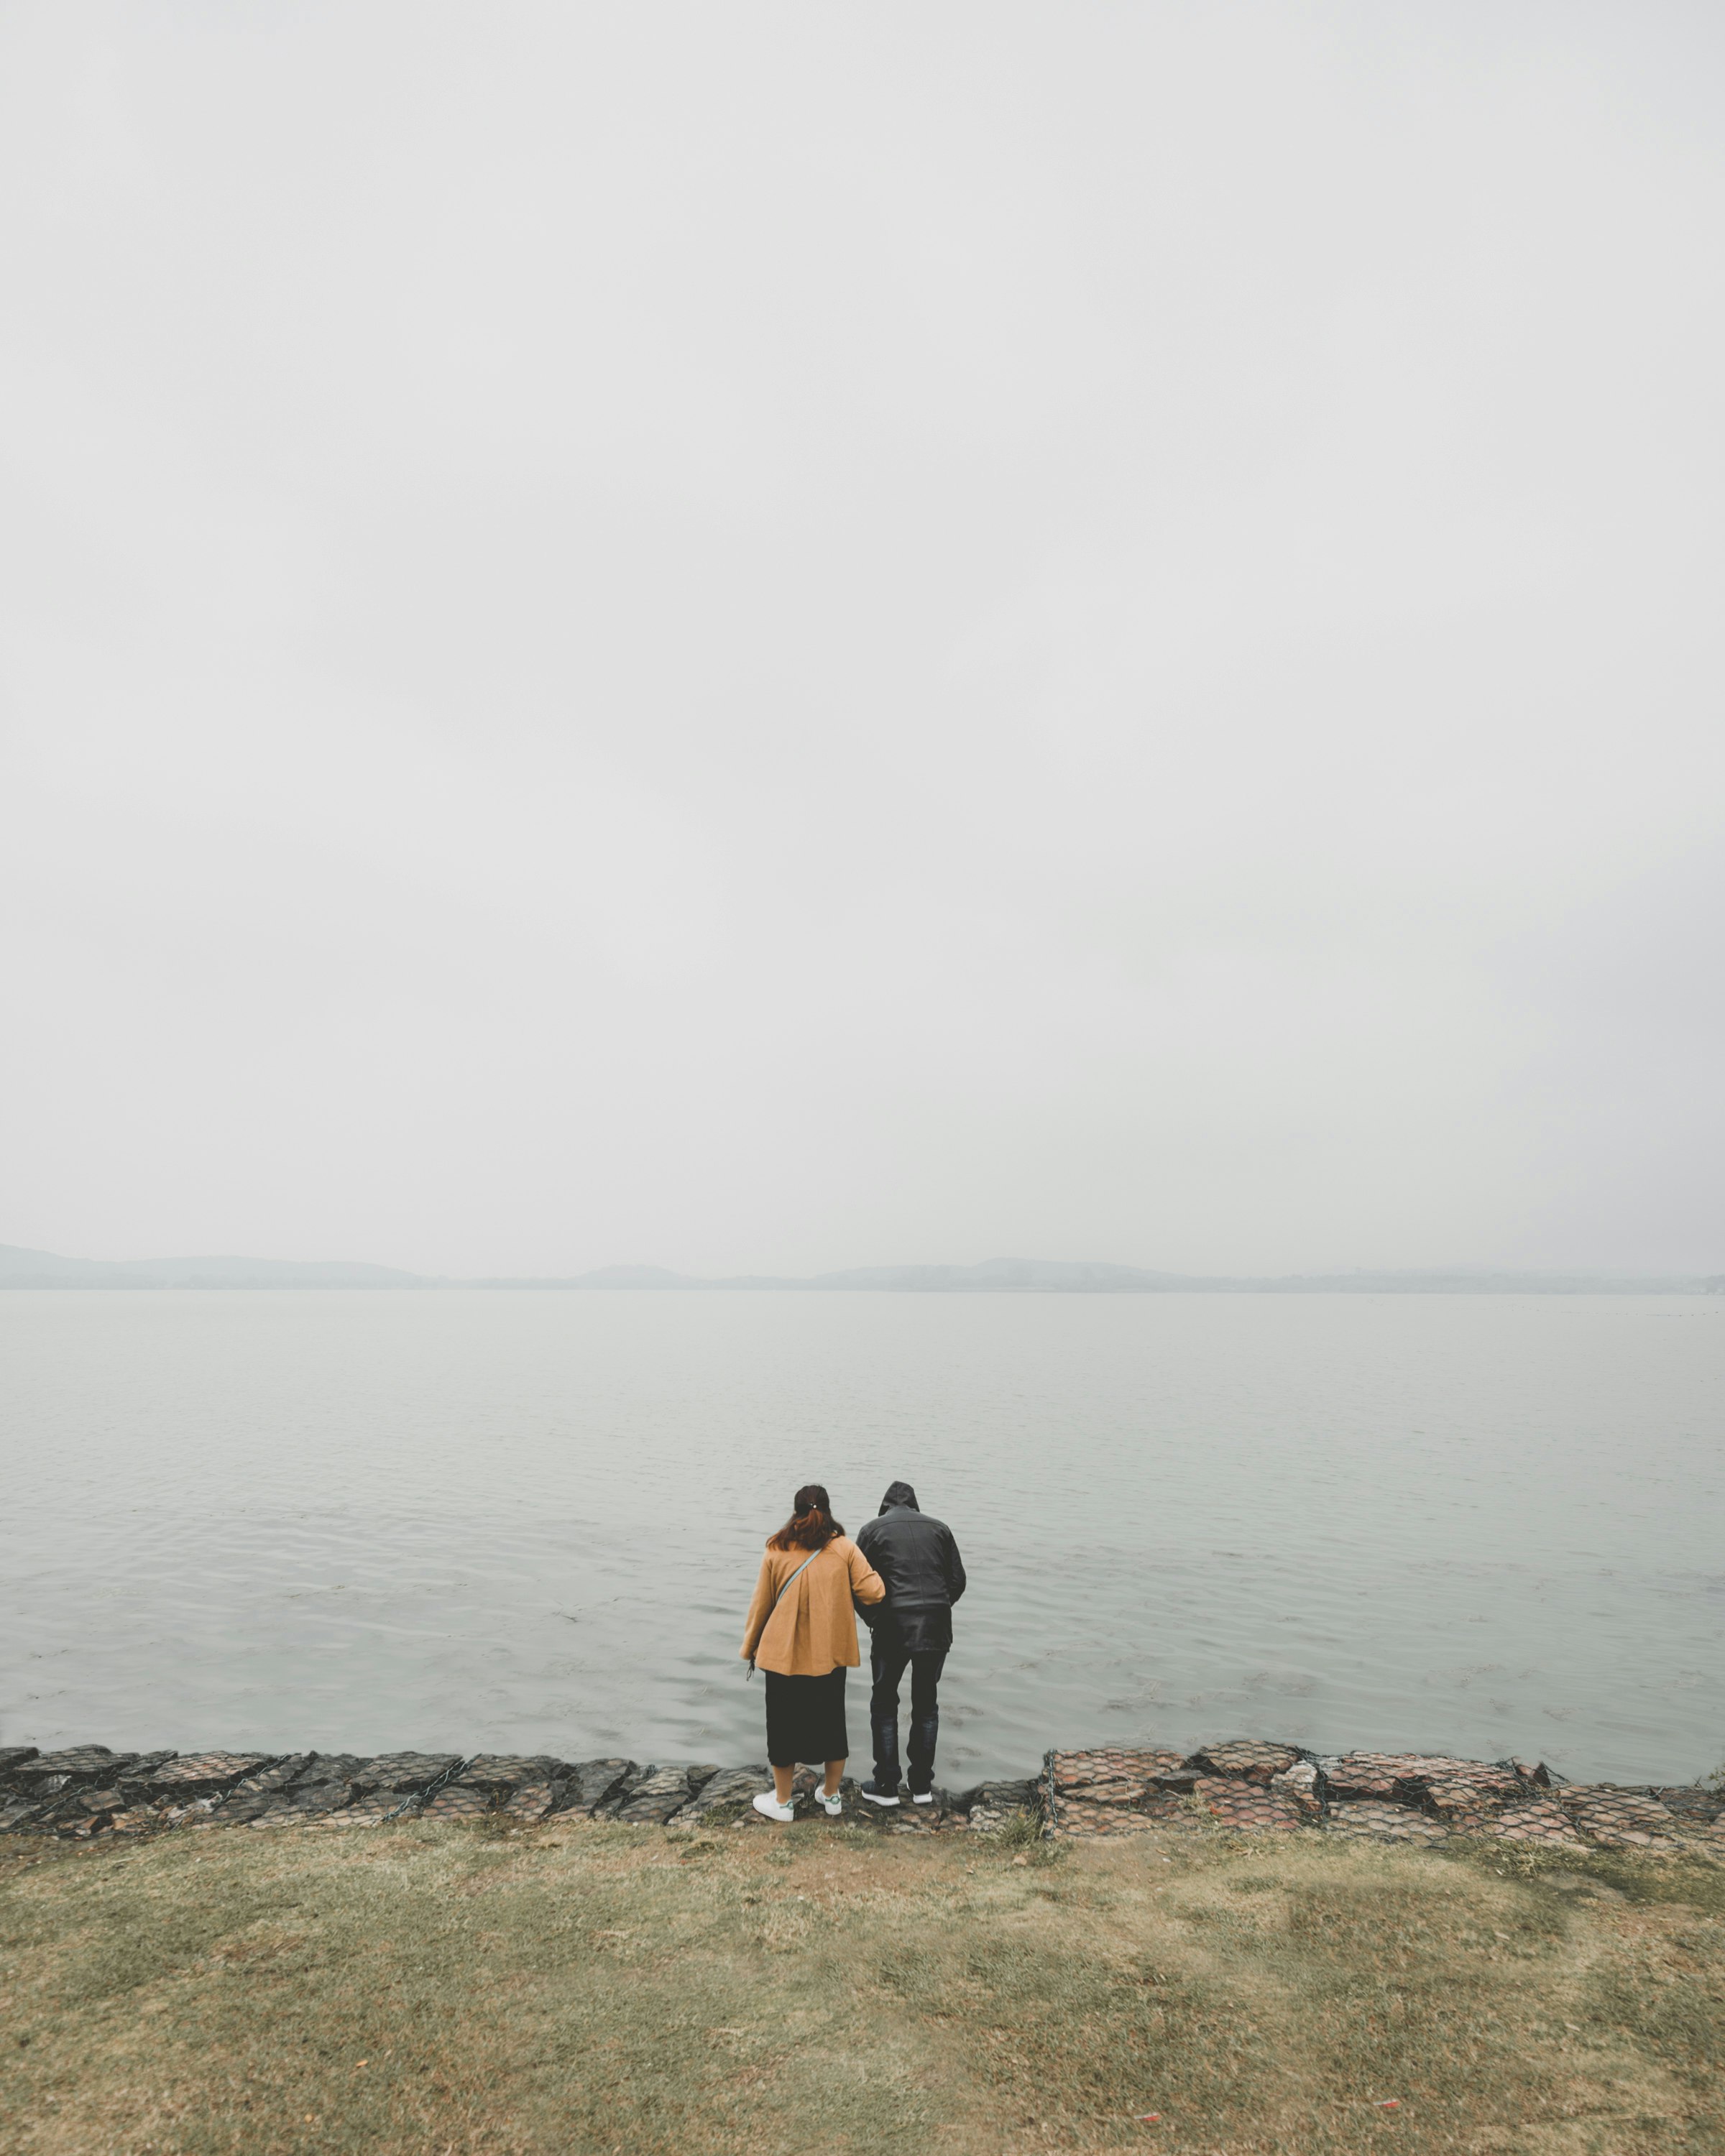 two person standing in front of body of water during daytime